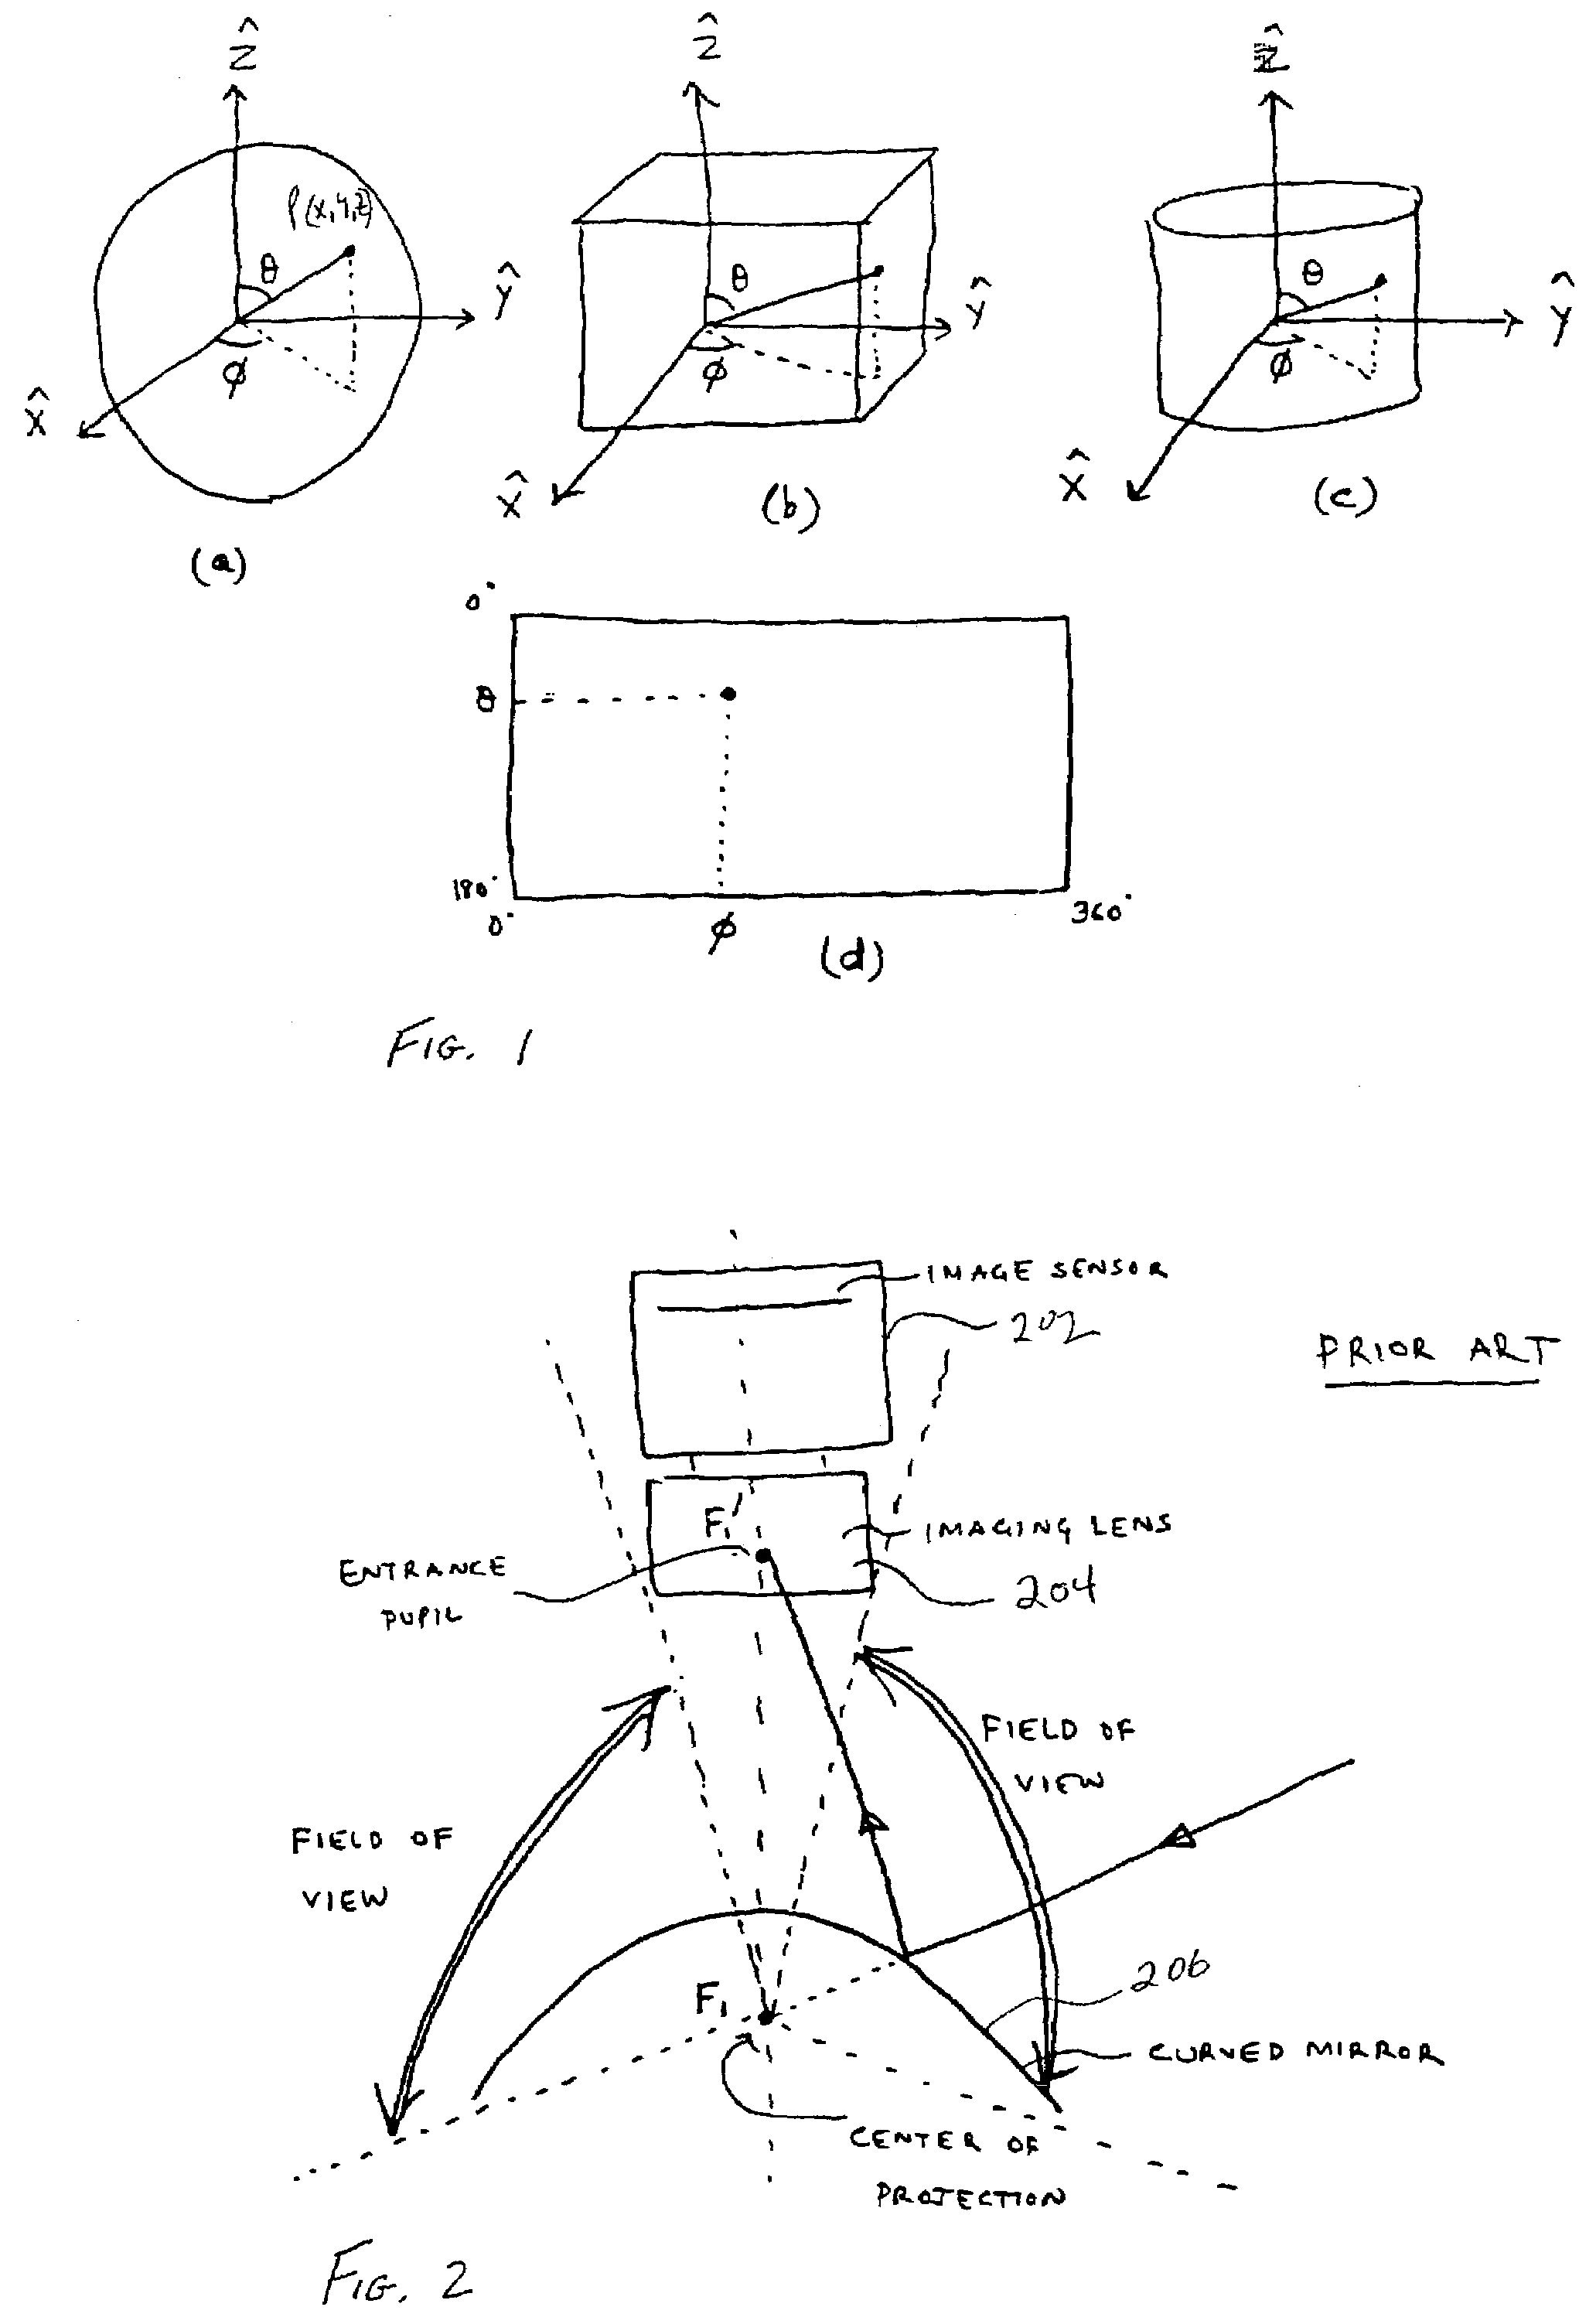 System and methods for generating spherical mosaic images